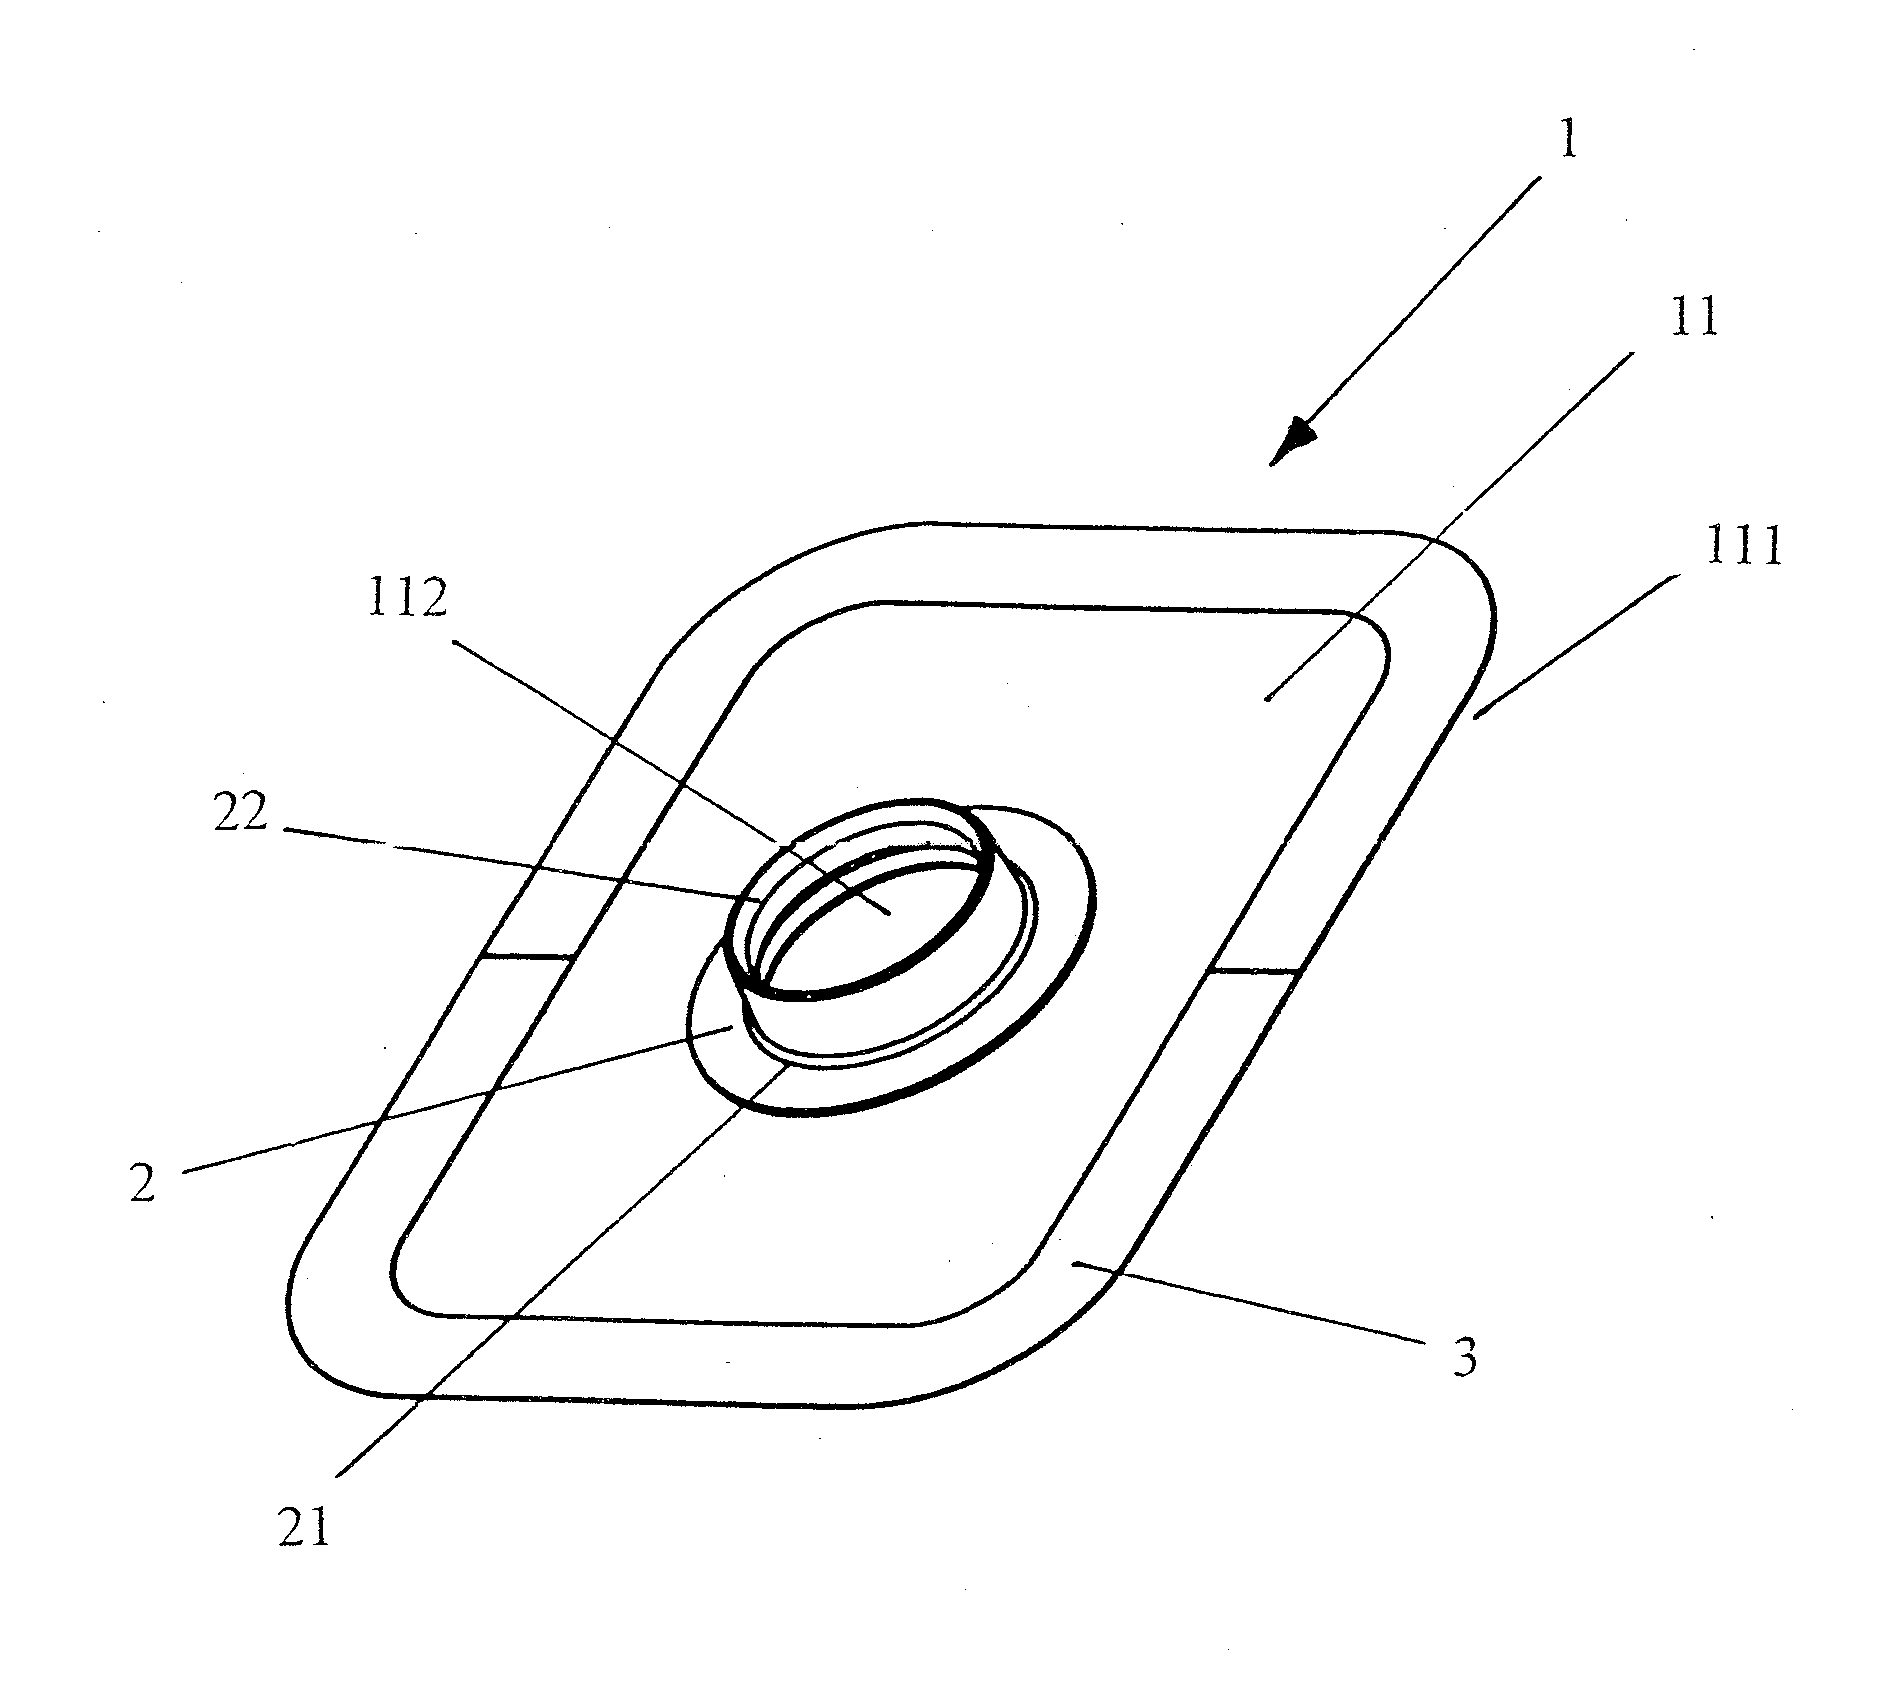 Neck patch for tracheal cannulas or artificial noses having a speaking valve